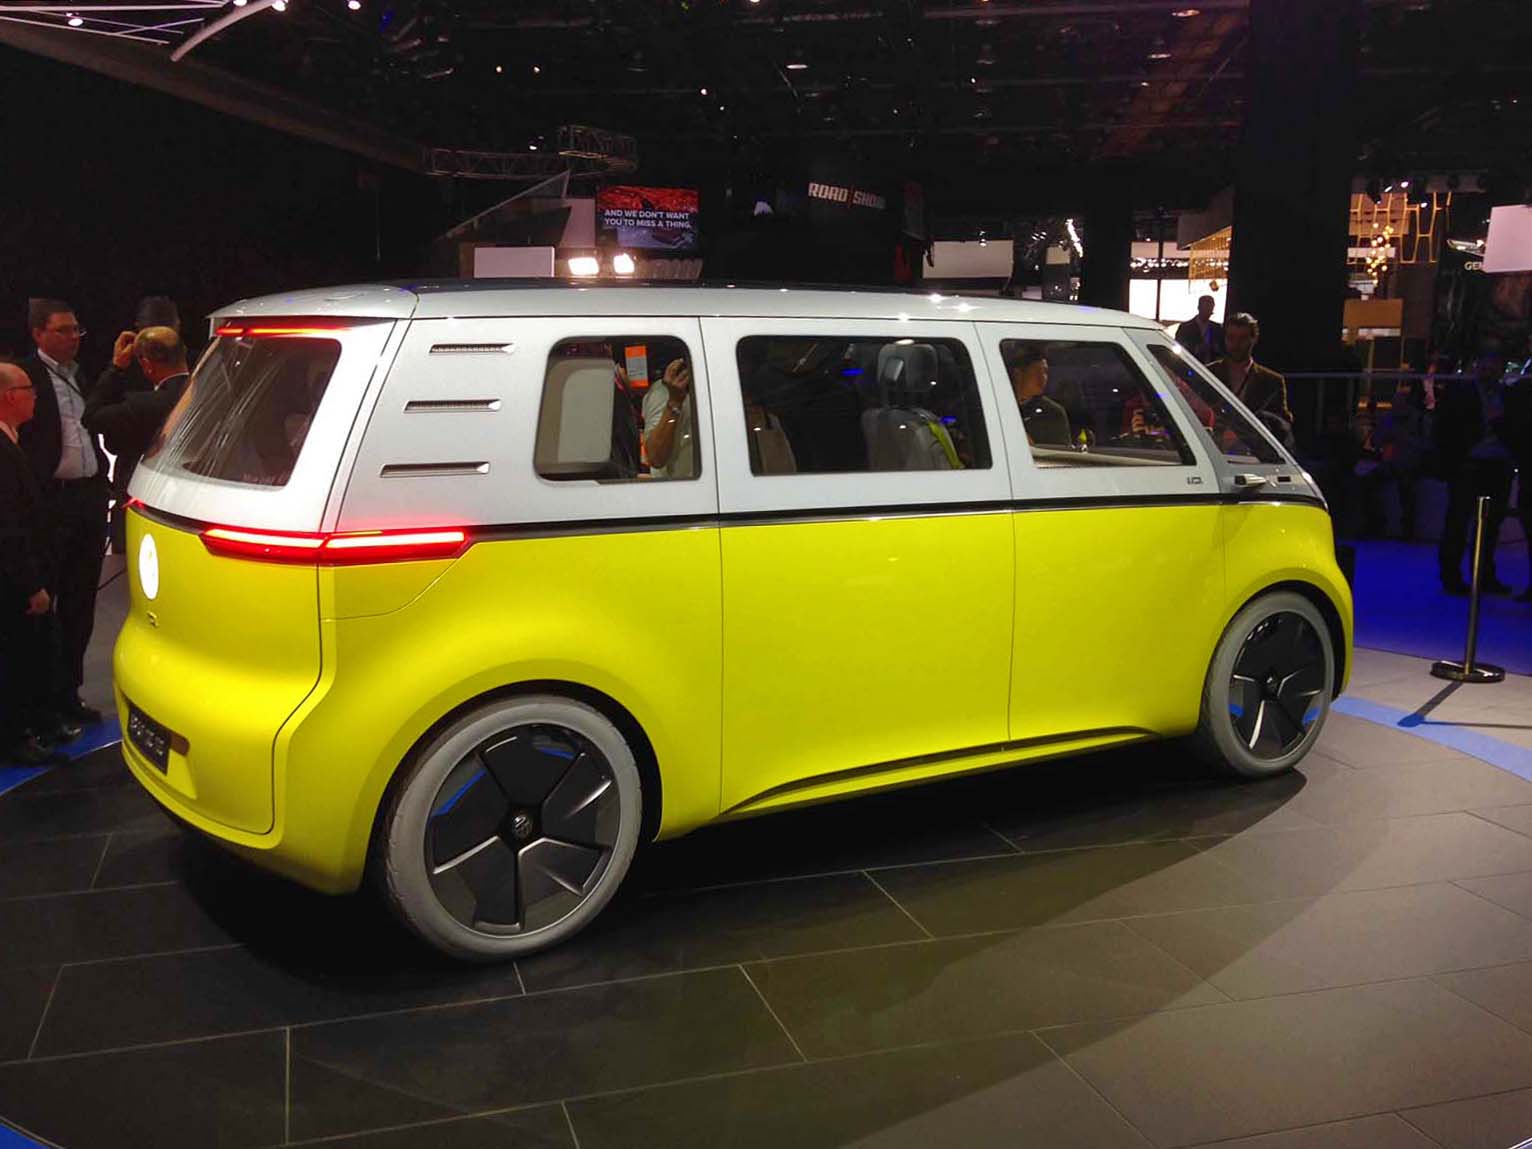 PB: This too-cute fully electric take on the original VW Microbus claims a 430 km range. It’s built on Volkswagen’s MEB electric platform that will come online in 2020. The battery pack spreads out under the flat floor, so interior space is cavernous. The interior is as clean and charming as its skin, and VW brass say this is no flight-of-fancy concept. It’s enough to distract everyone from Dieselgate.